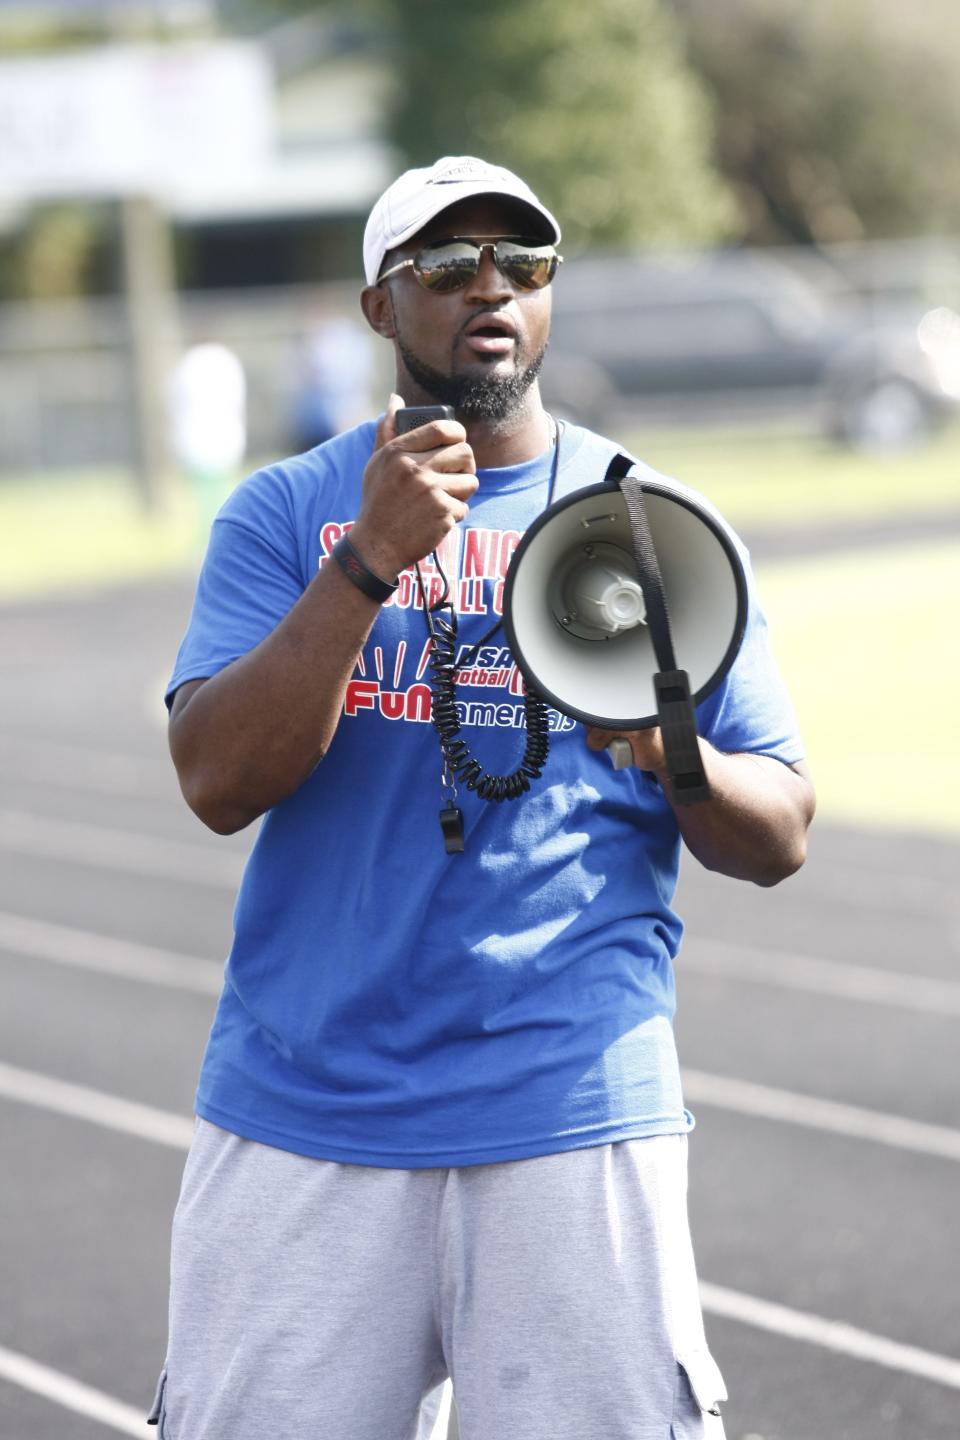 Coach Antwan Nicholas instructs the kids at a 2012 football camp hosted by Atlanta Falcons linebacker and Jacksonville native Stephen Nicholas at Mallison Park on Jacksonville's Westside.